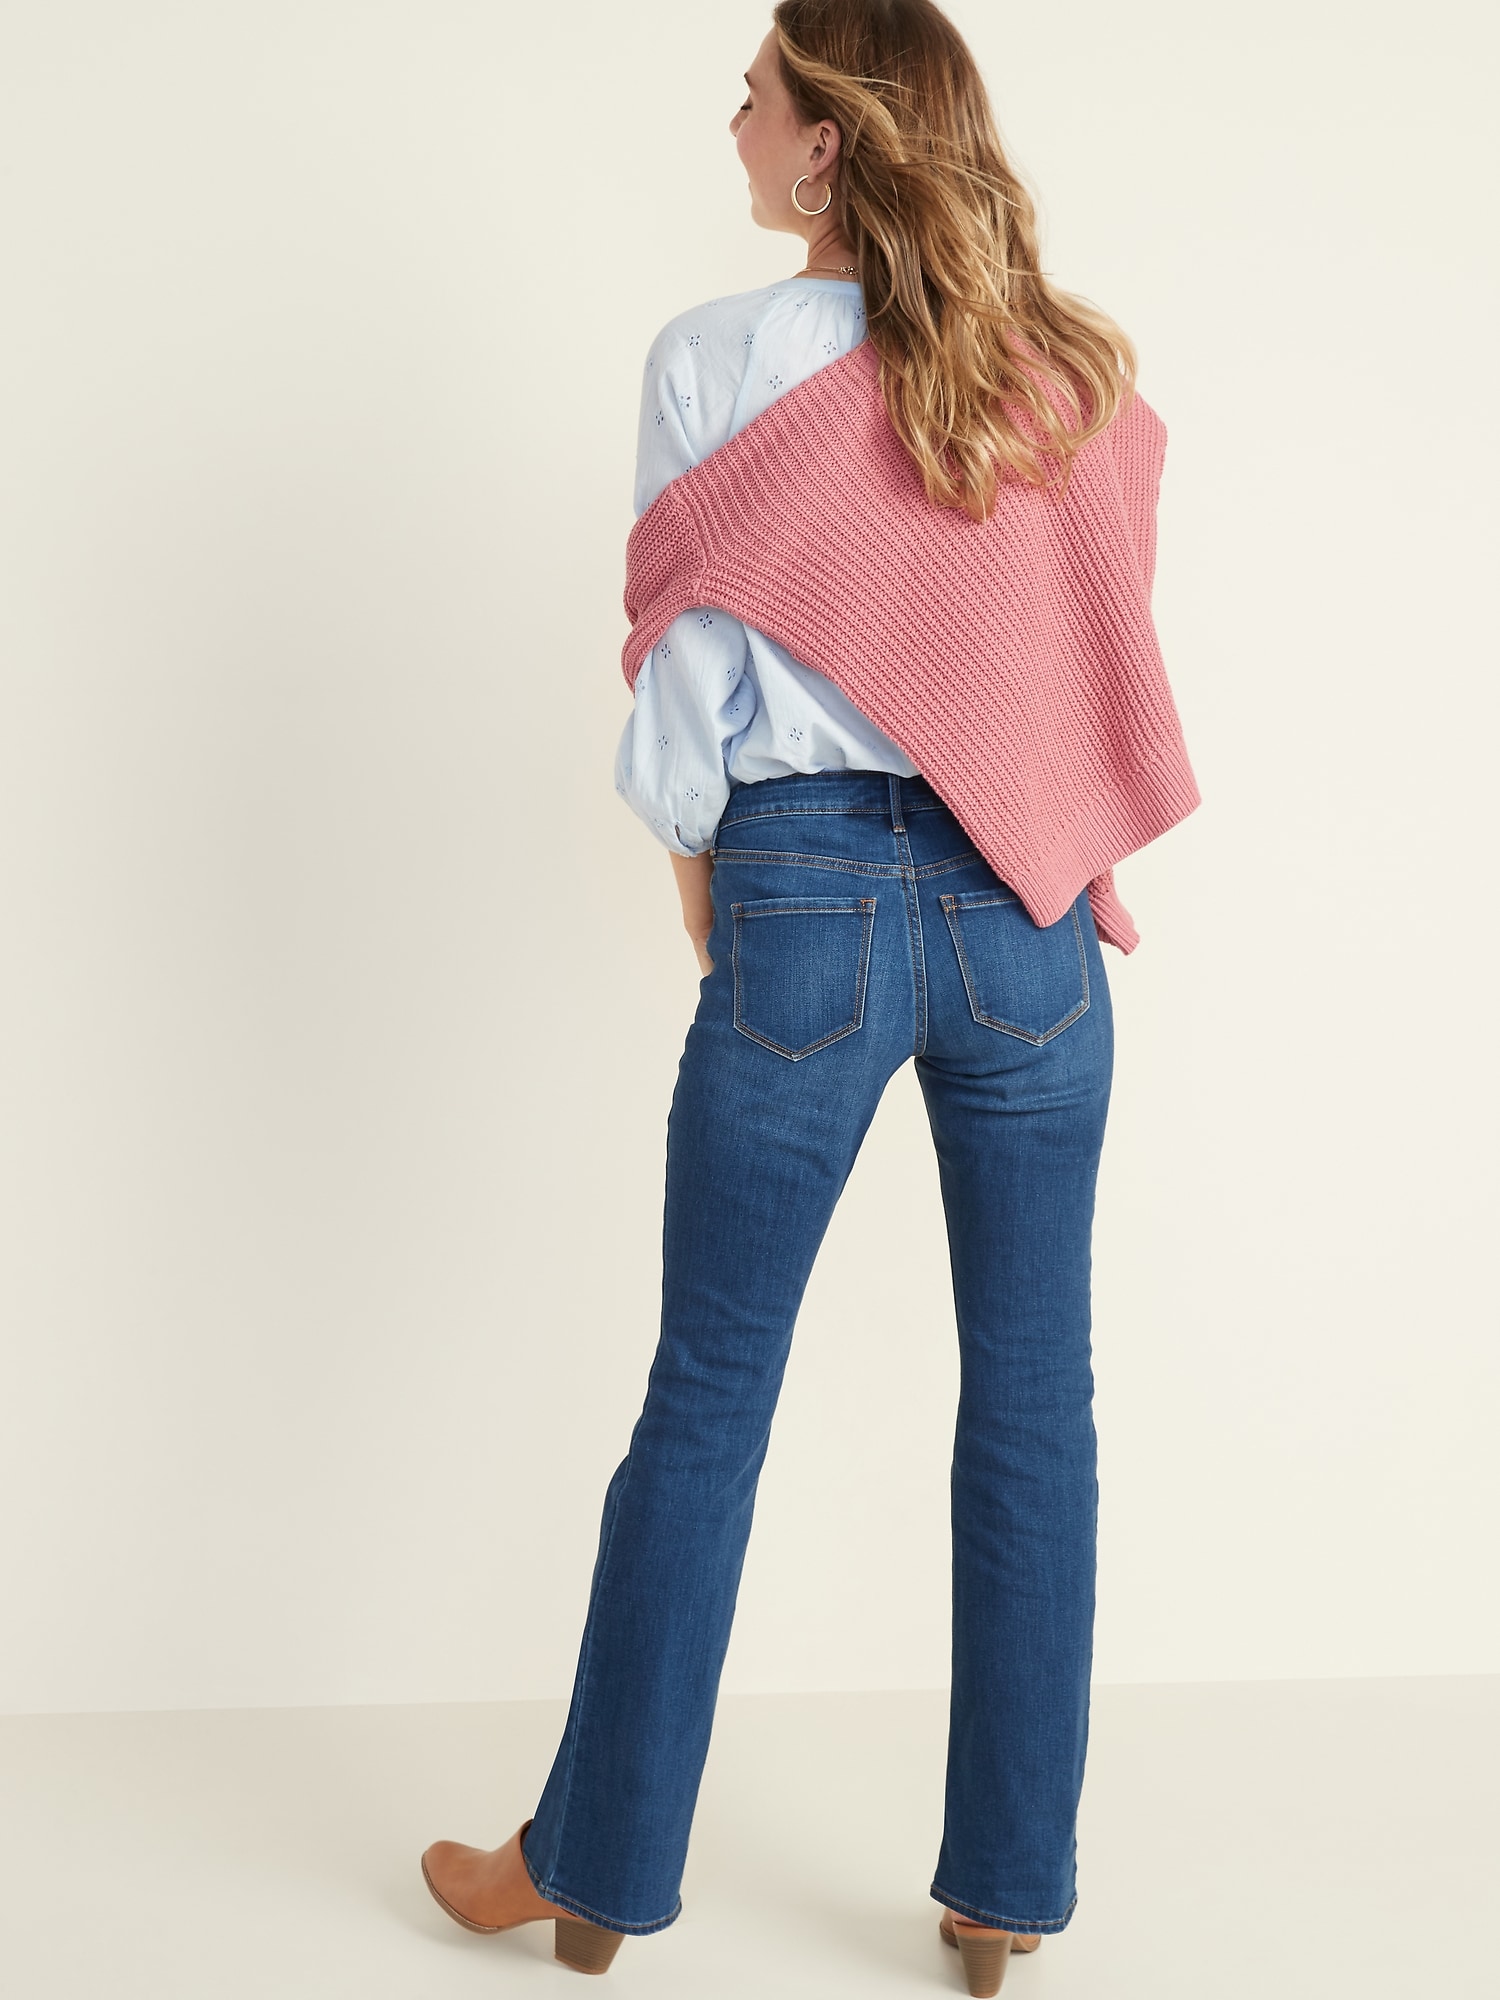 old navy bell bottom jeans